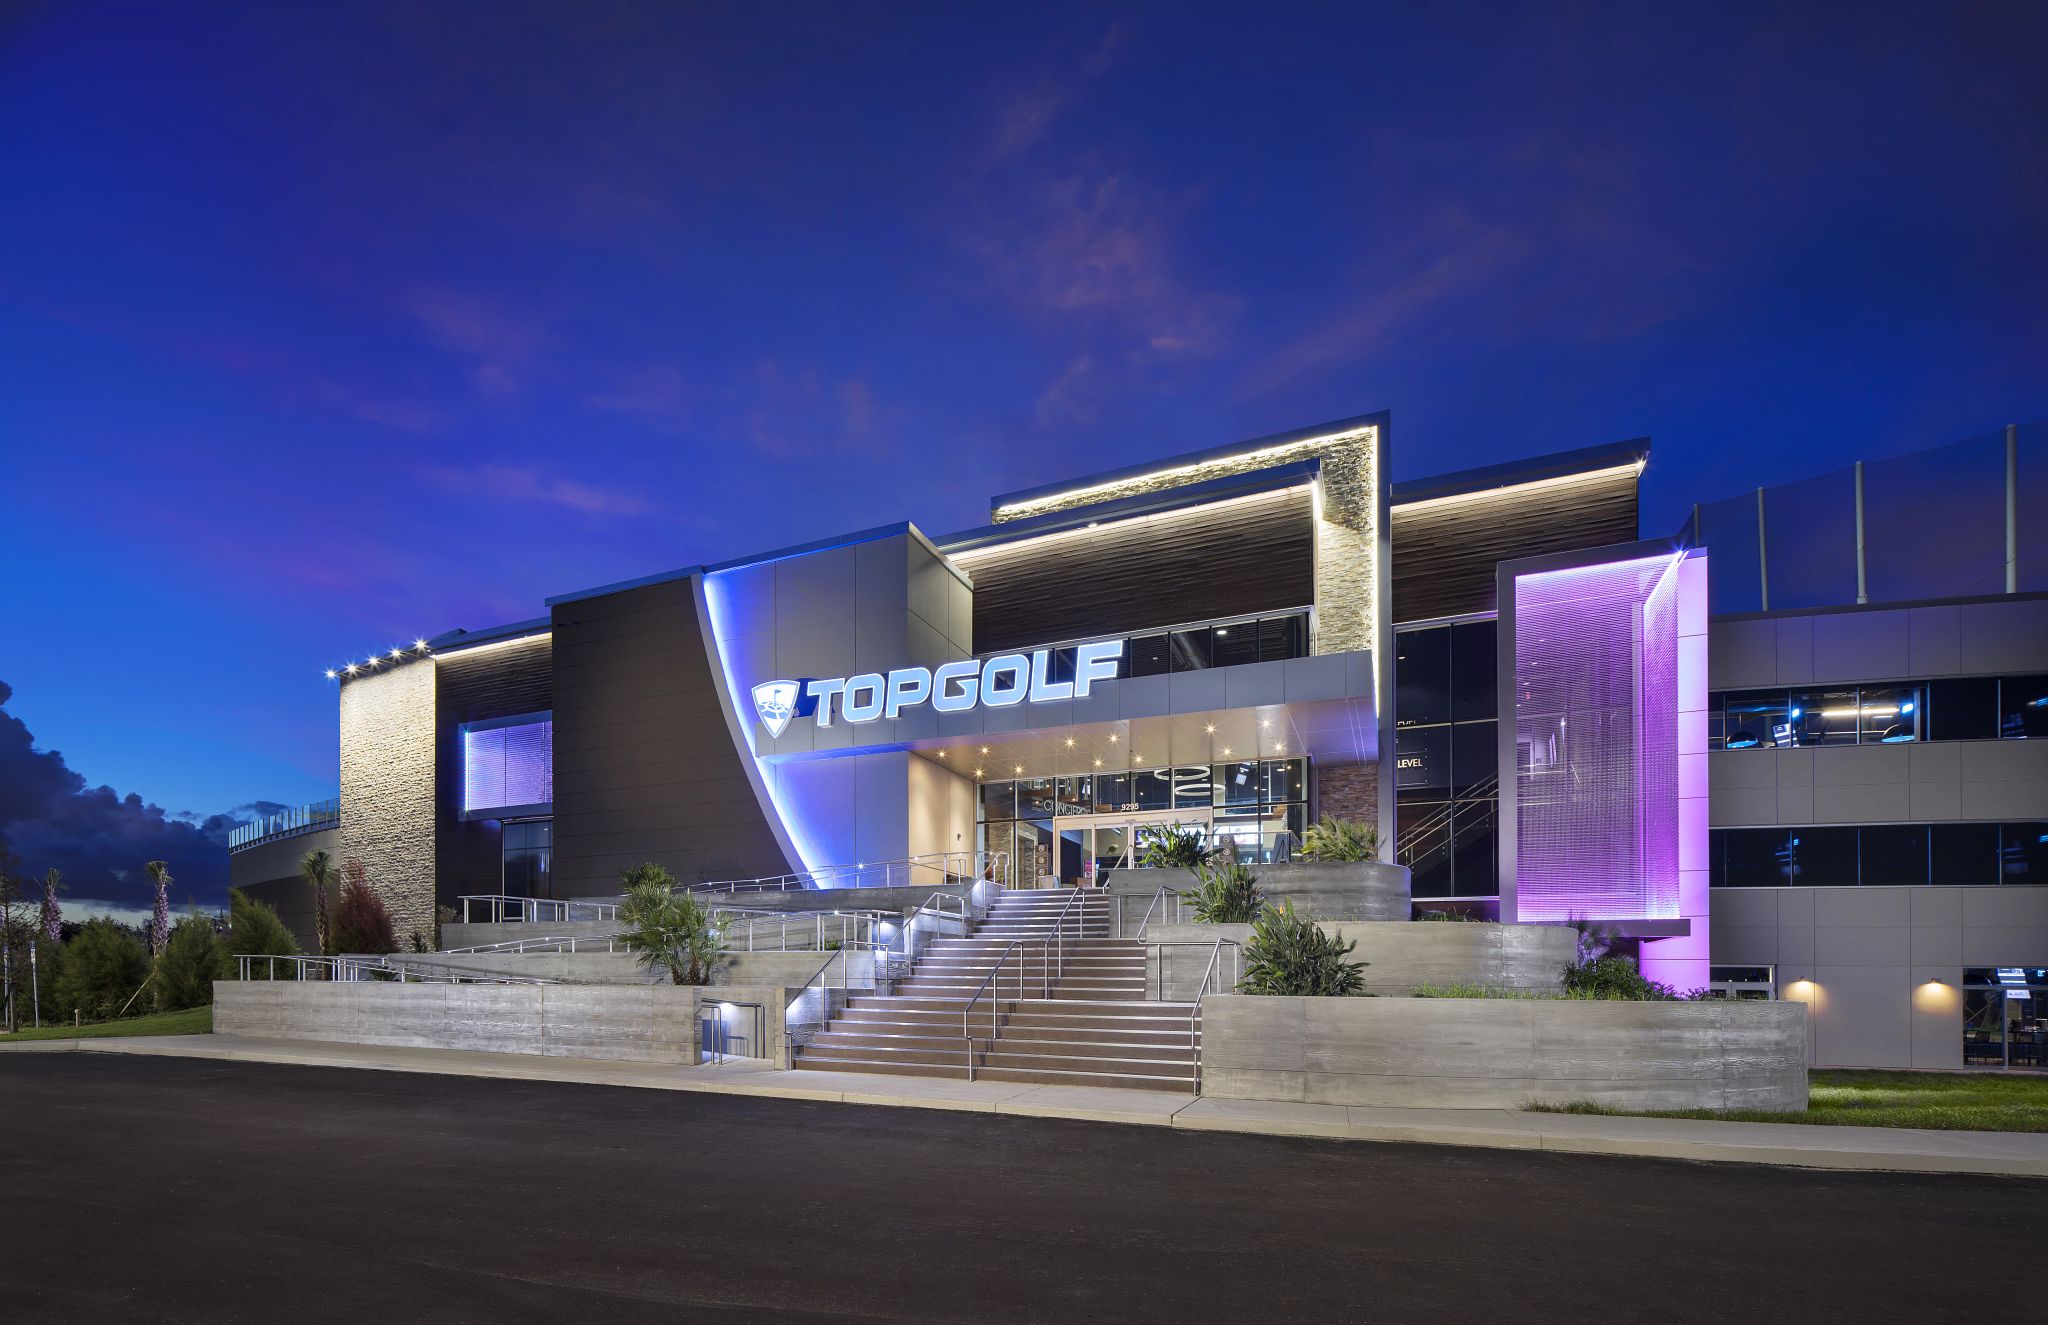 Eating Orlando An Orlando Food Blog: Topgolf Orlando opens this Friday:  Let's check out the food!